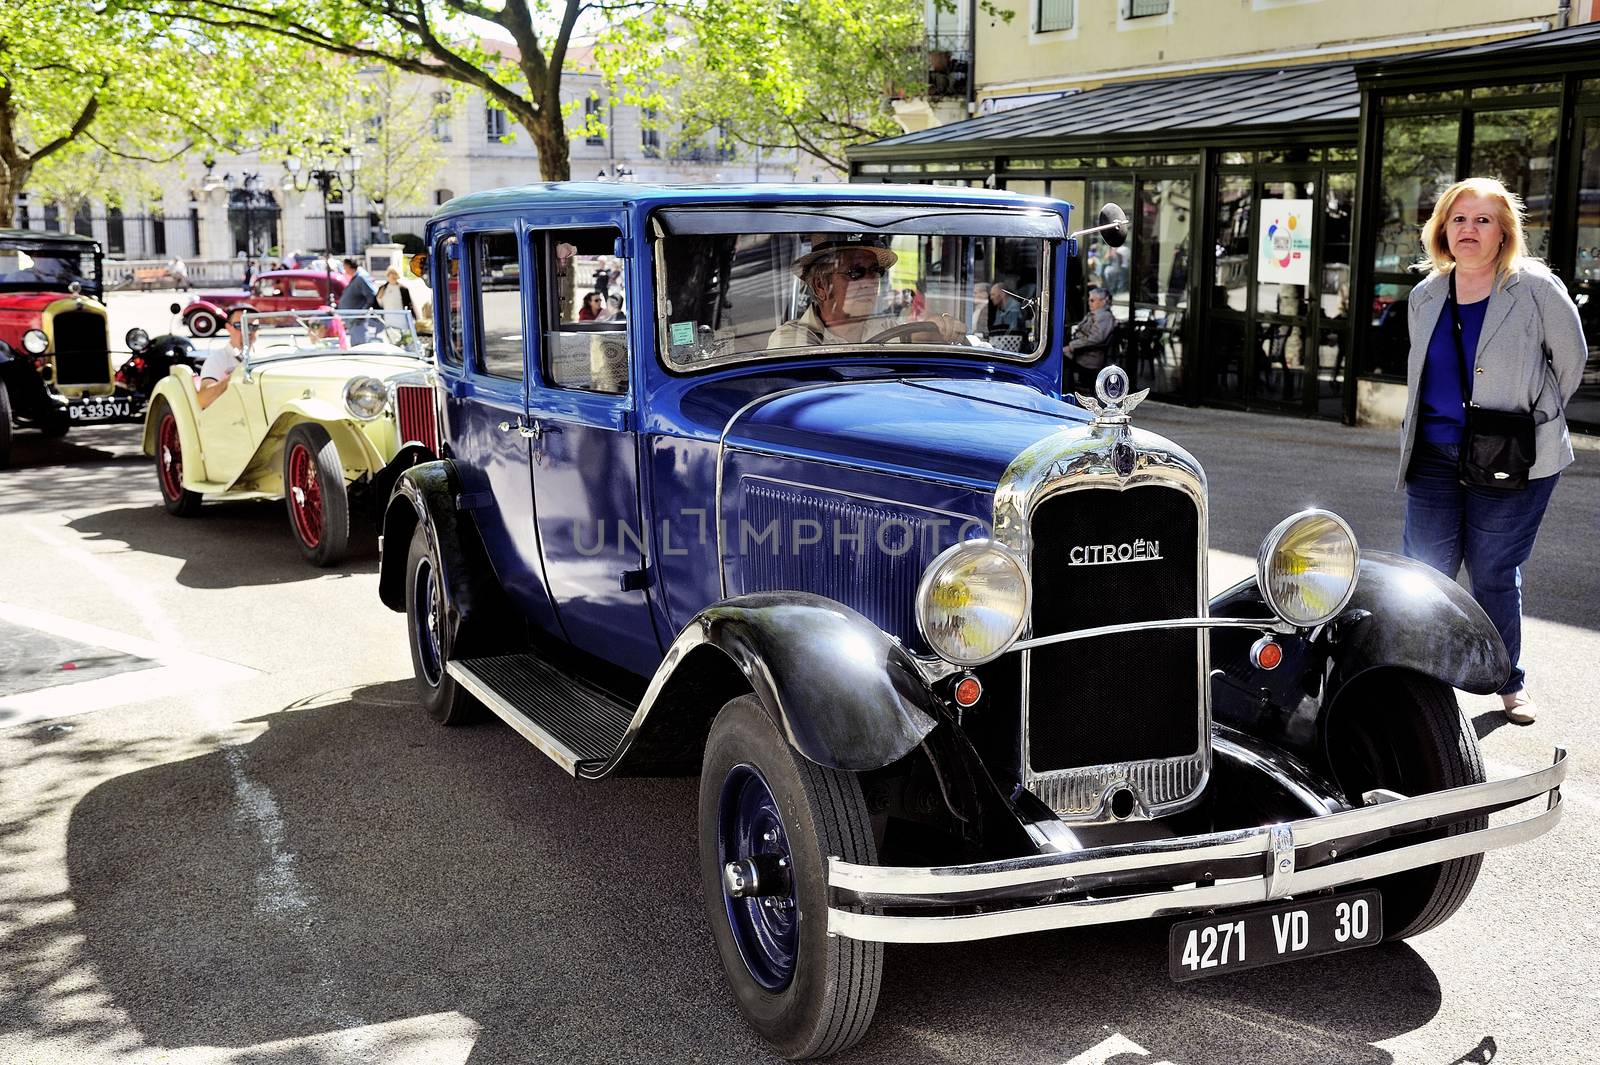 old Citroen car from the 1920s photographed vintage car rally Town Hall Square in the town of Ales